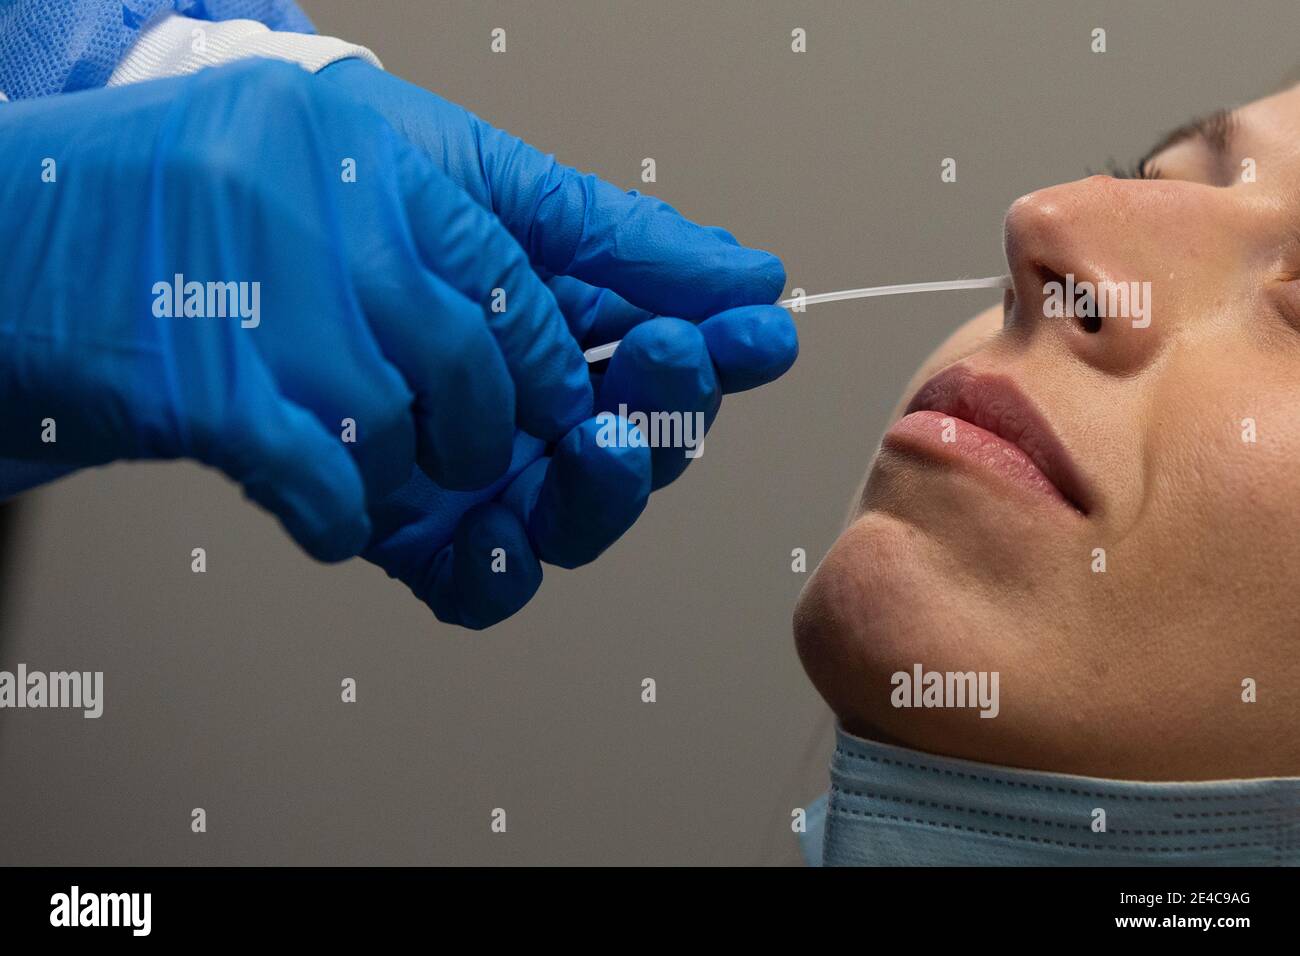 A person gets tested for COVID-19 at a pharmacy in Amherstview, Ontario on Friday, January 22, 2021, as the COVID-19 pandemic continues across Canada Stock Photo